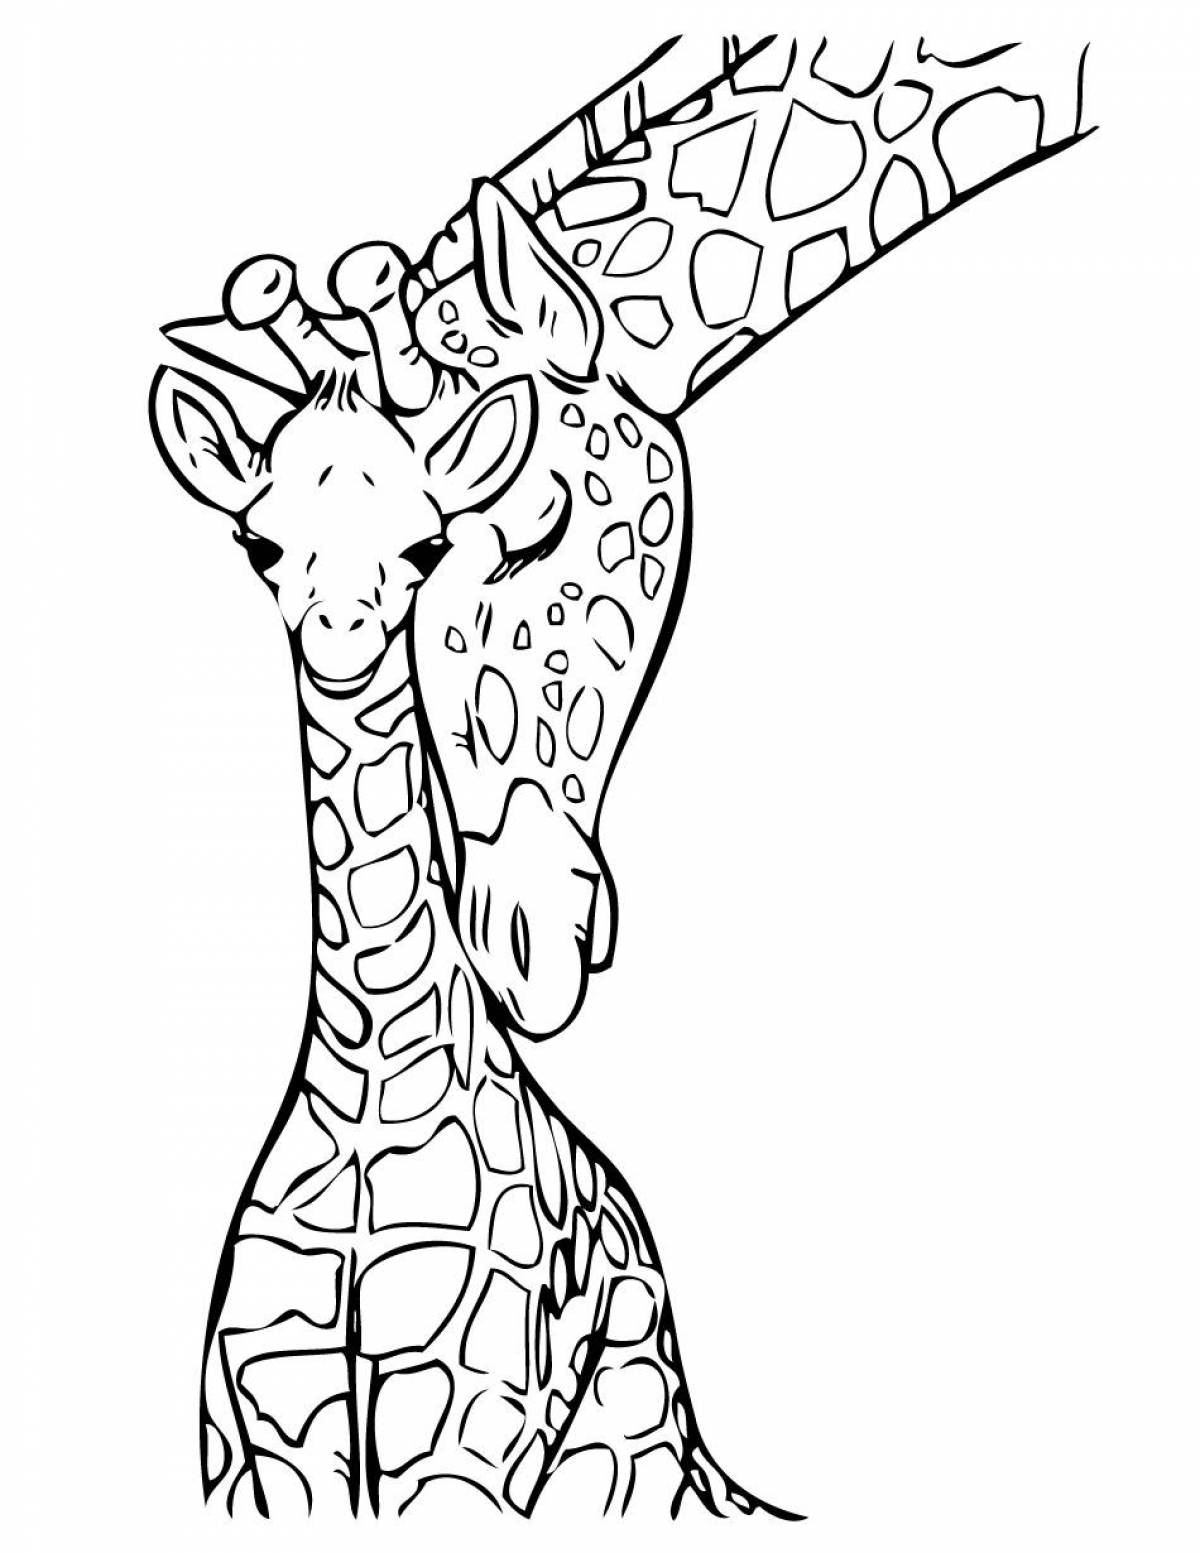 Exquisite giraffe coloring book for kids